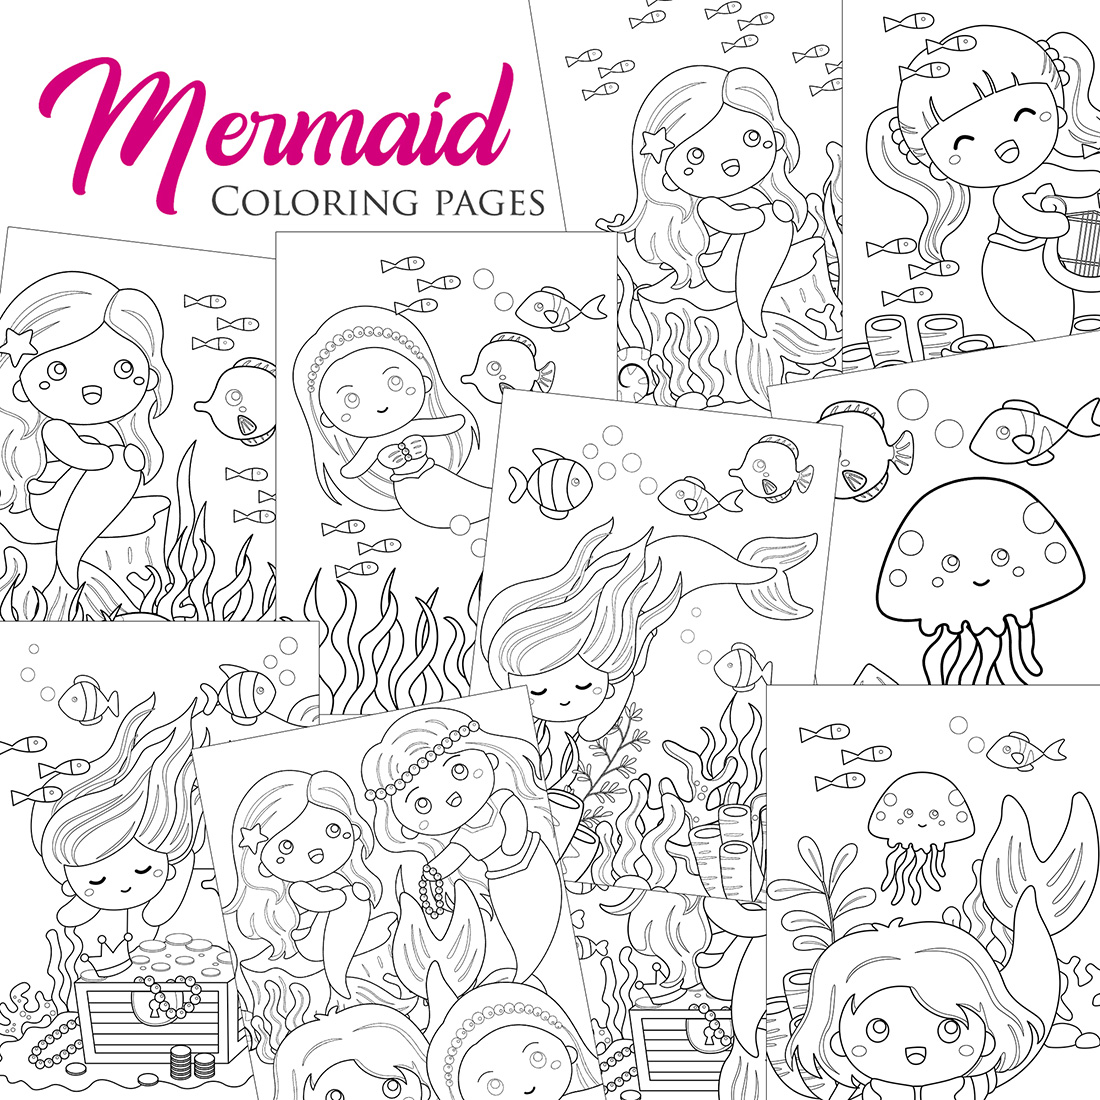 Cute Swimming Little Mermaid Cartoon Coloring Pages for Kids and Adult cover image.